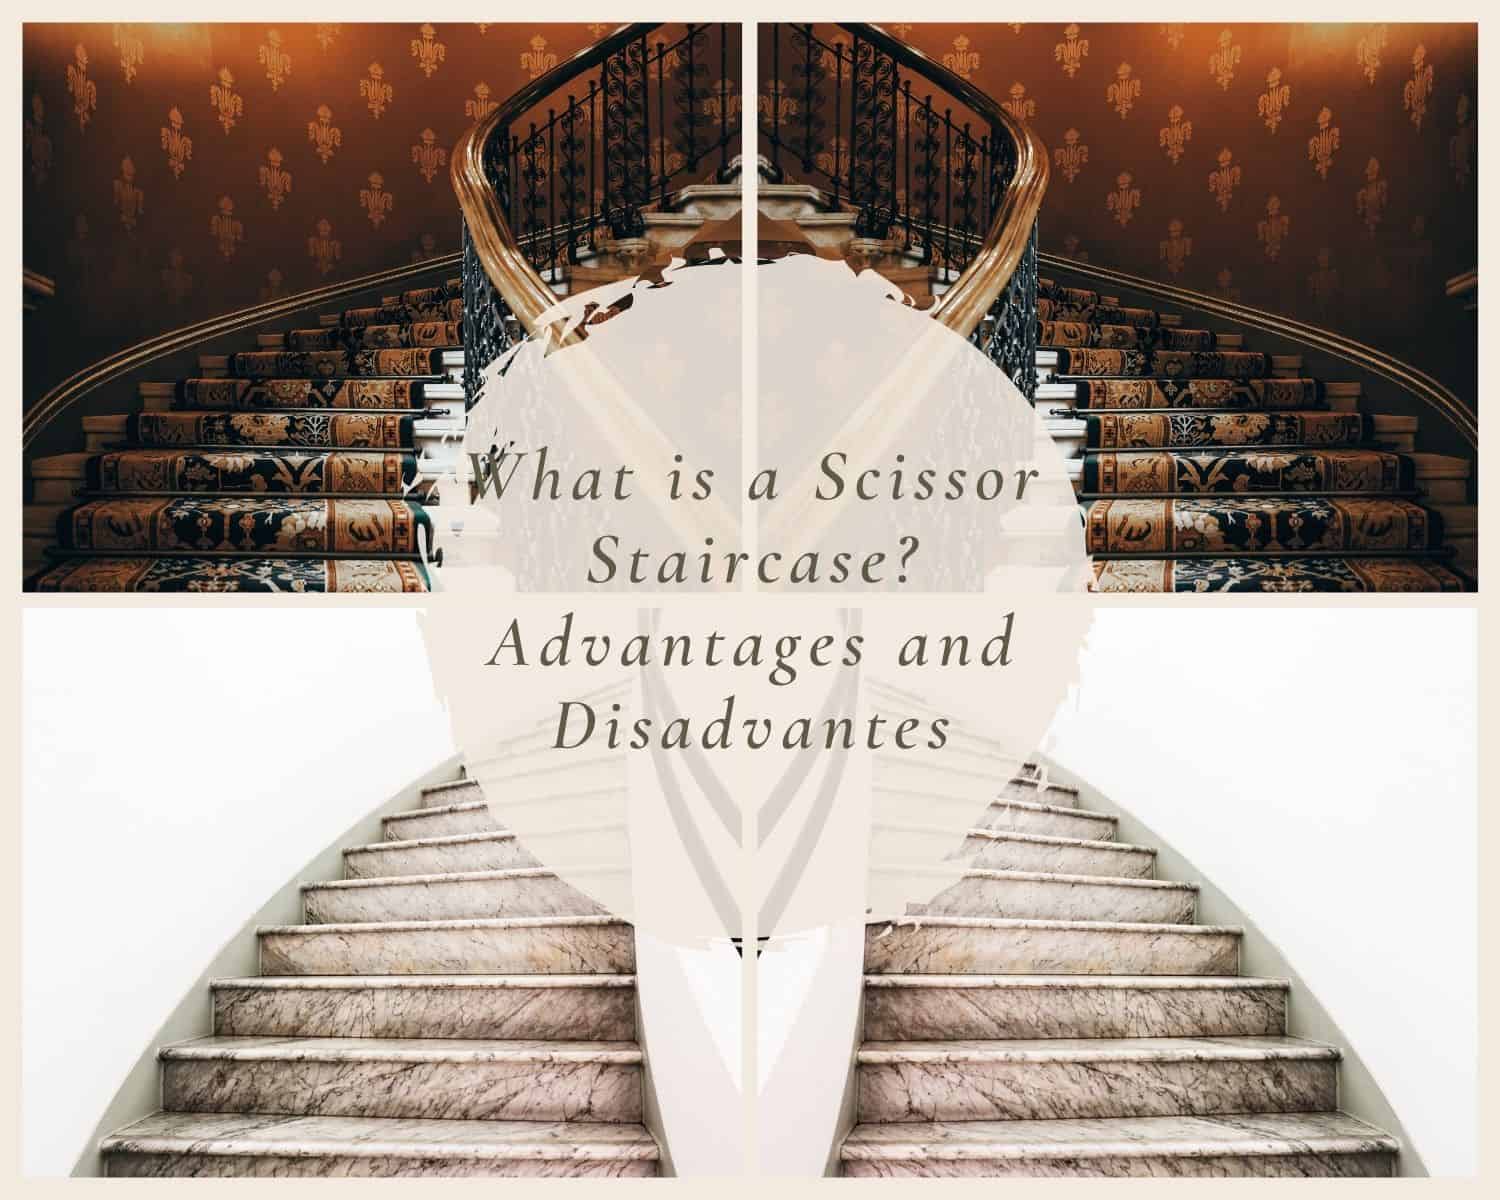 What is a Scissor Staircase